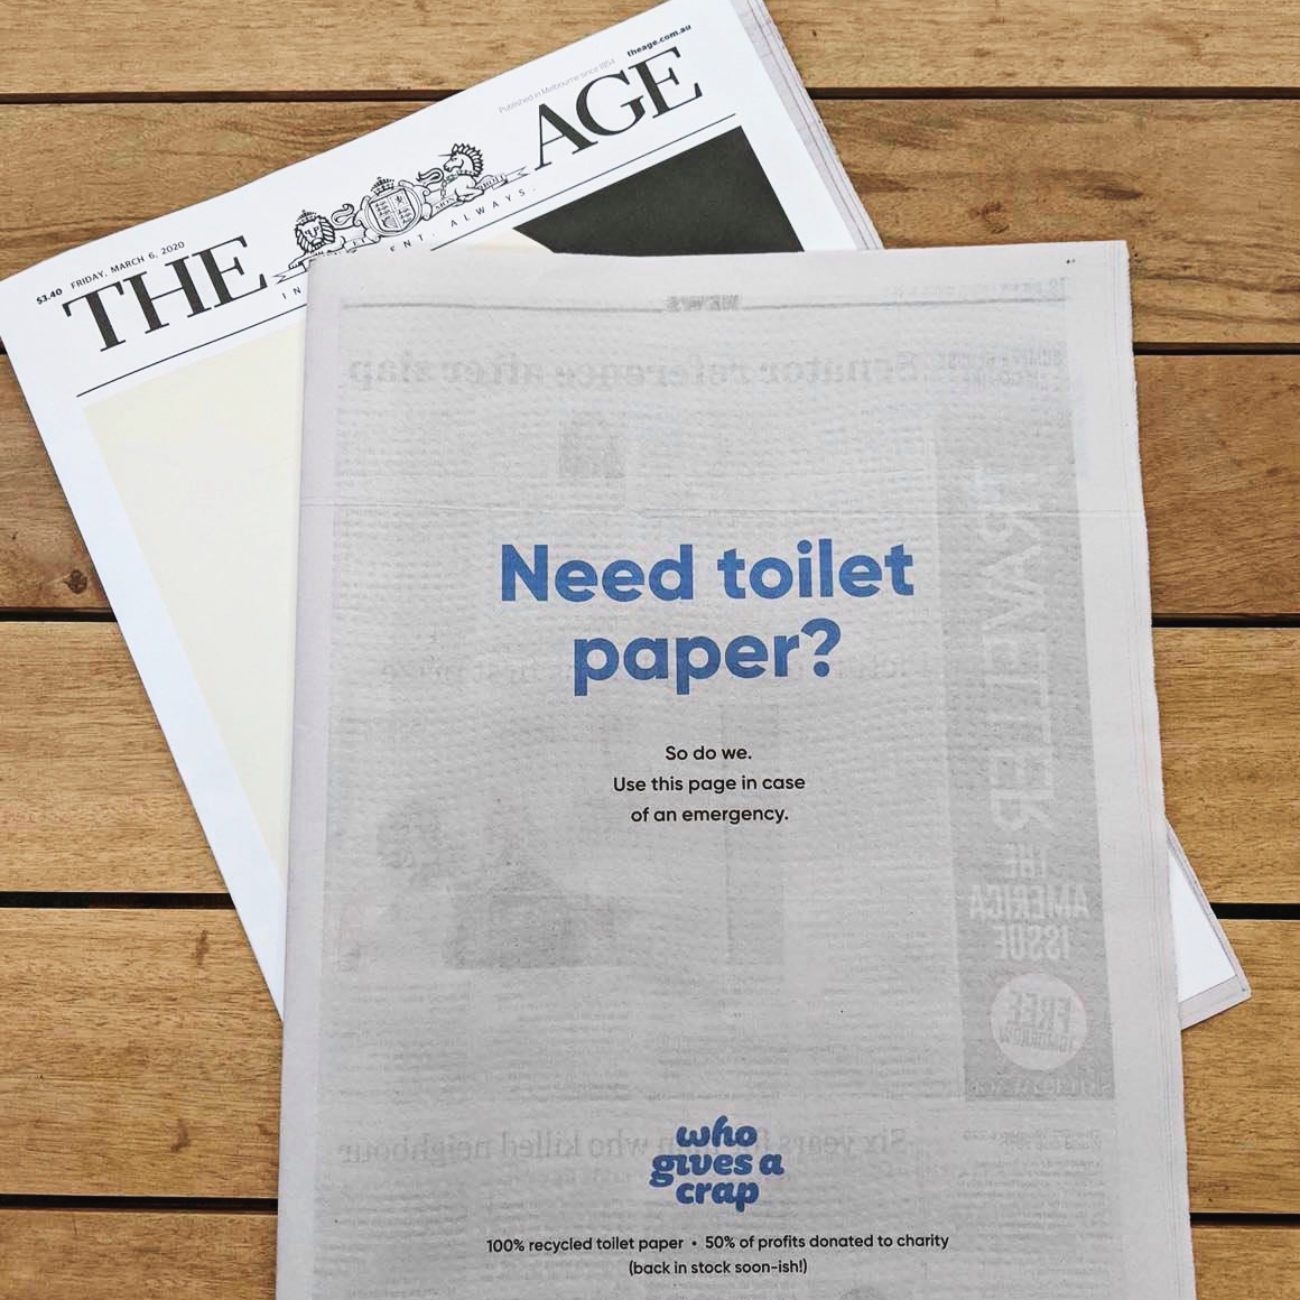 Who Gives a Crap ran a full-page ad in Australia, the day after they sold out of toilet paper amidst the pandemic rush.  Danny Alexander, Who Gives a Crap: Giving a crap – Well Made E128